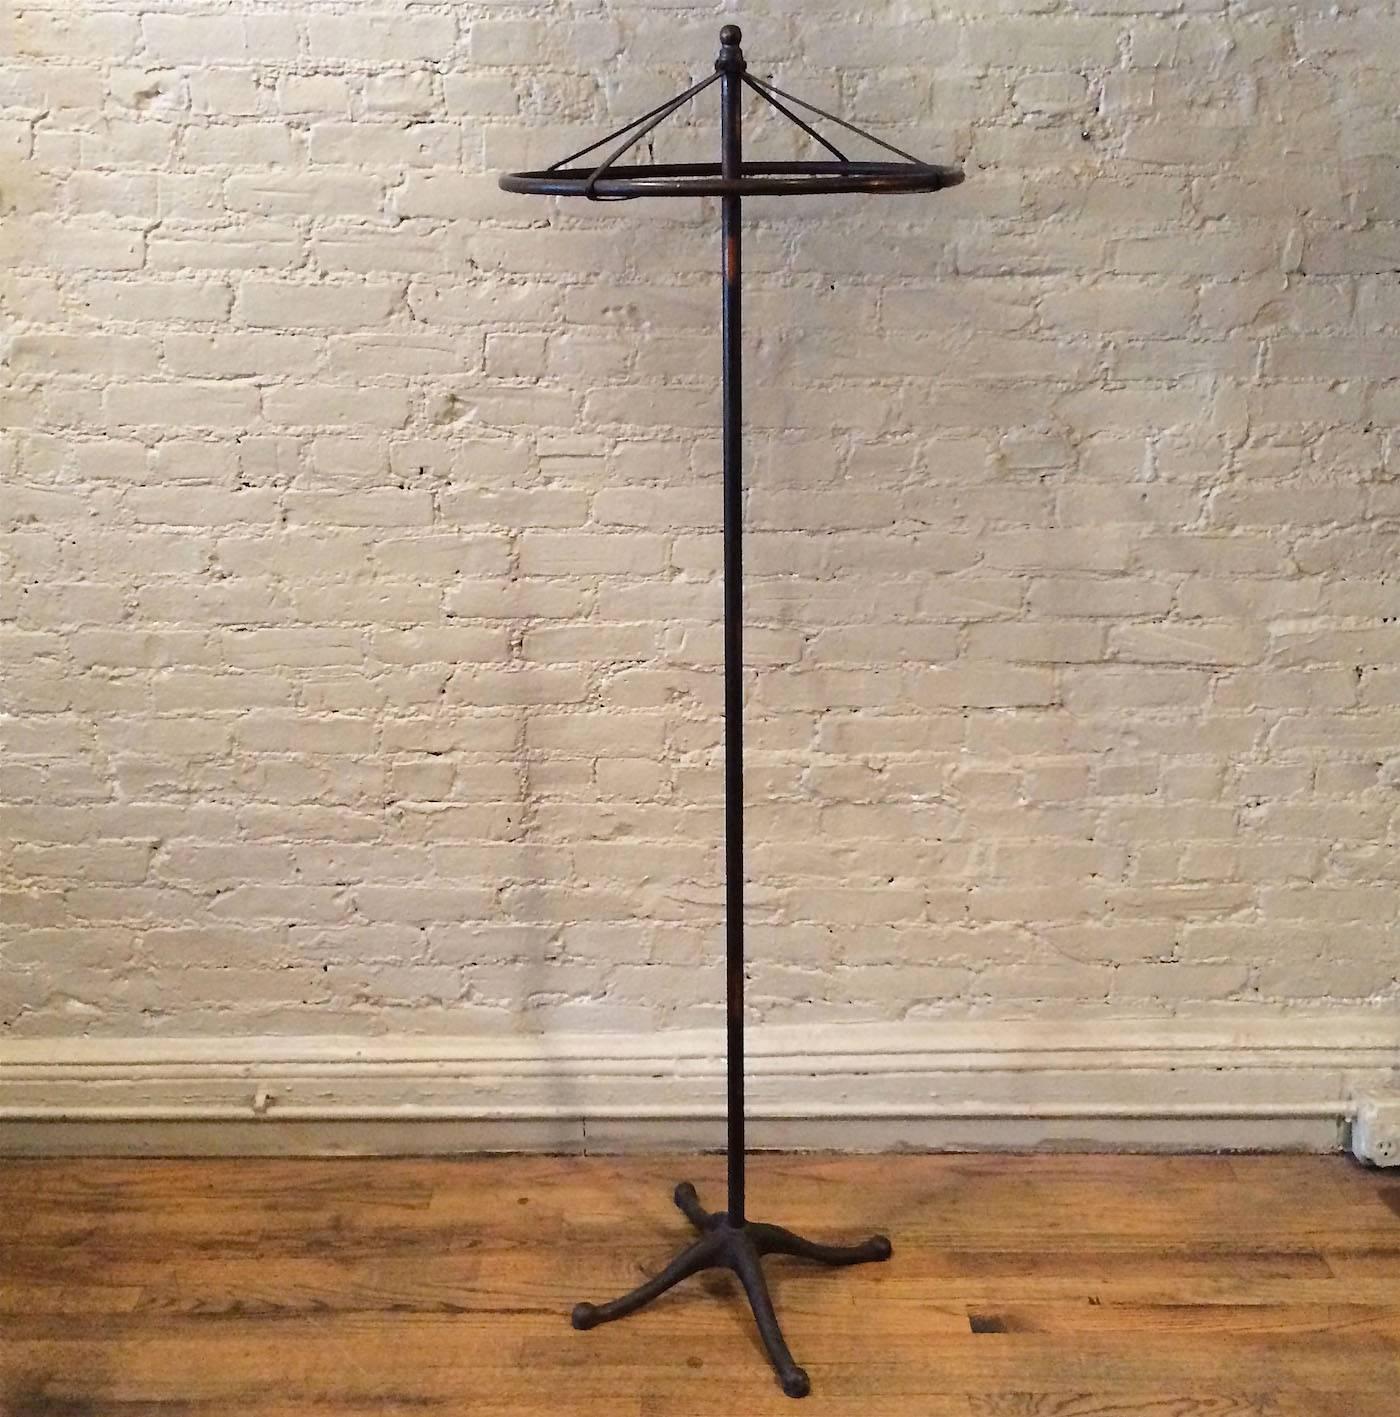 Early 20th century, Industrial, Japanned steel, rounder rack with cast iron base is a rare, smaller scale made for lingerie.